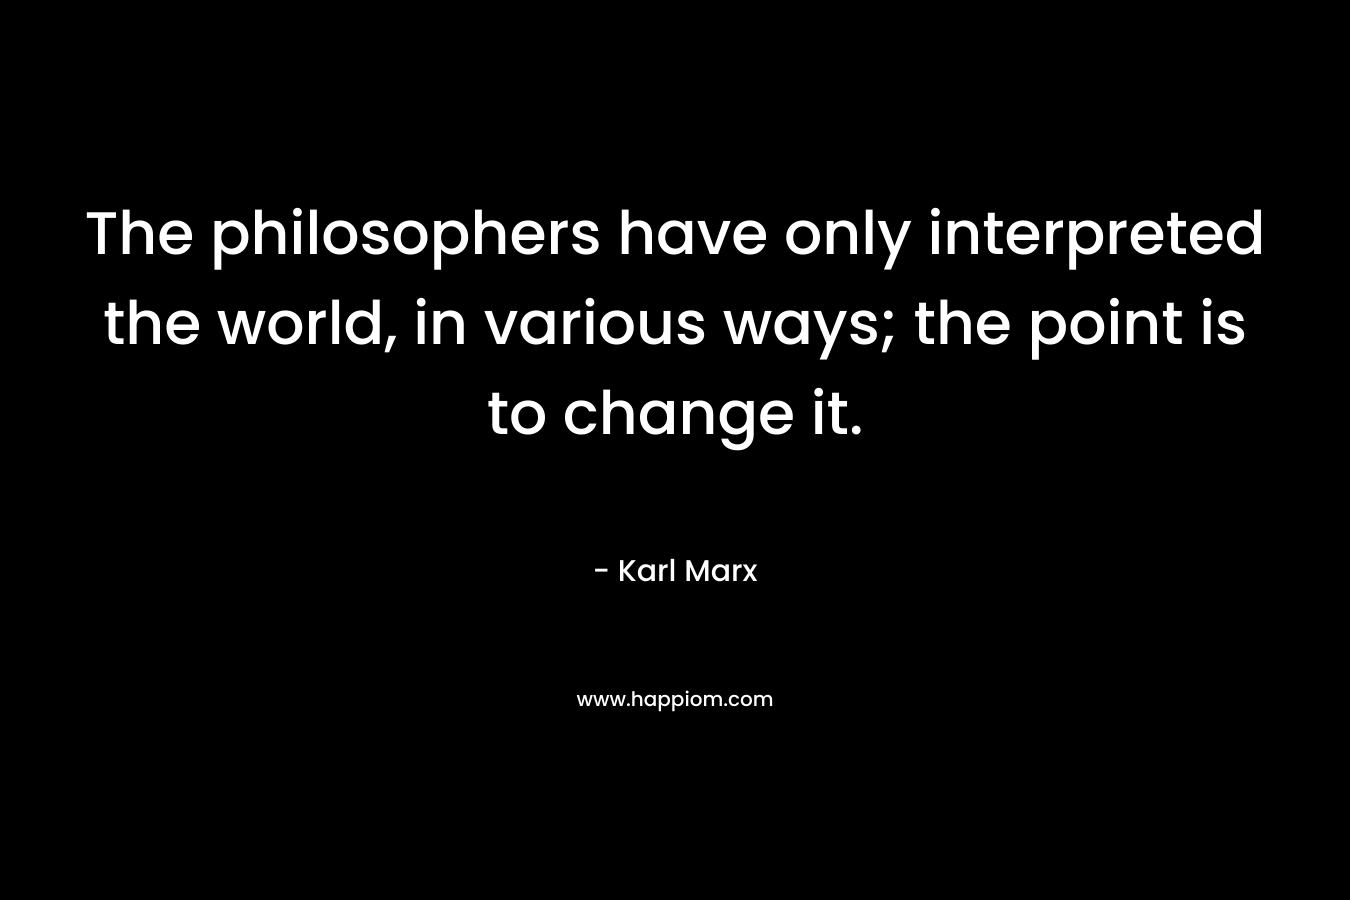 The philosophers have only interpreted the world, in various ways; the point is to change it.